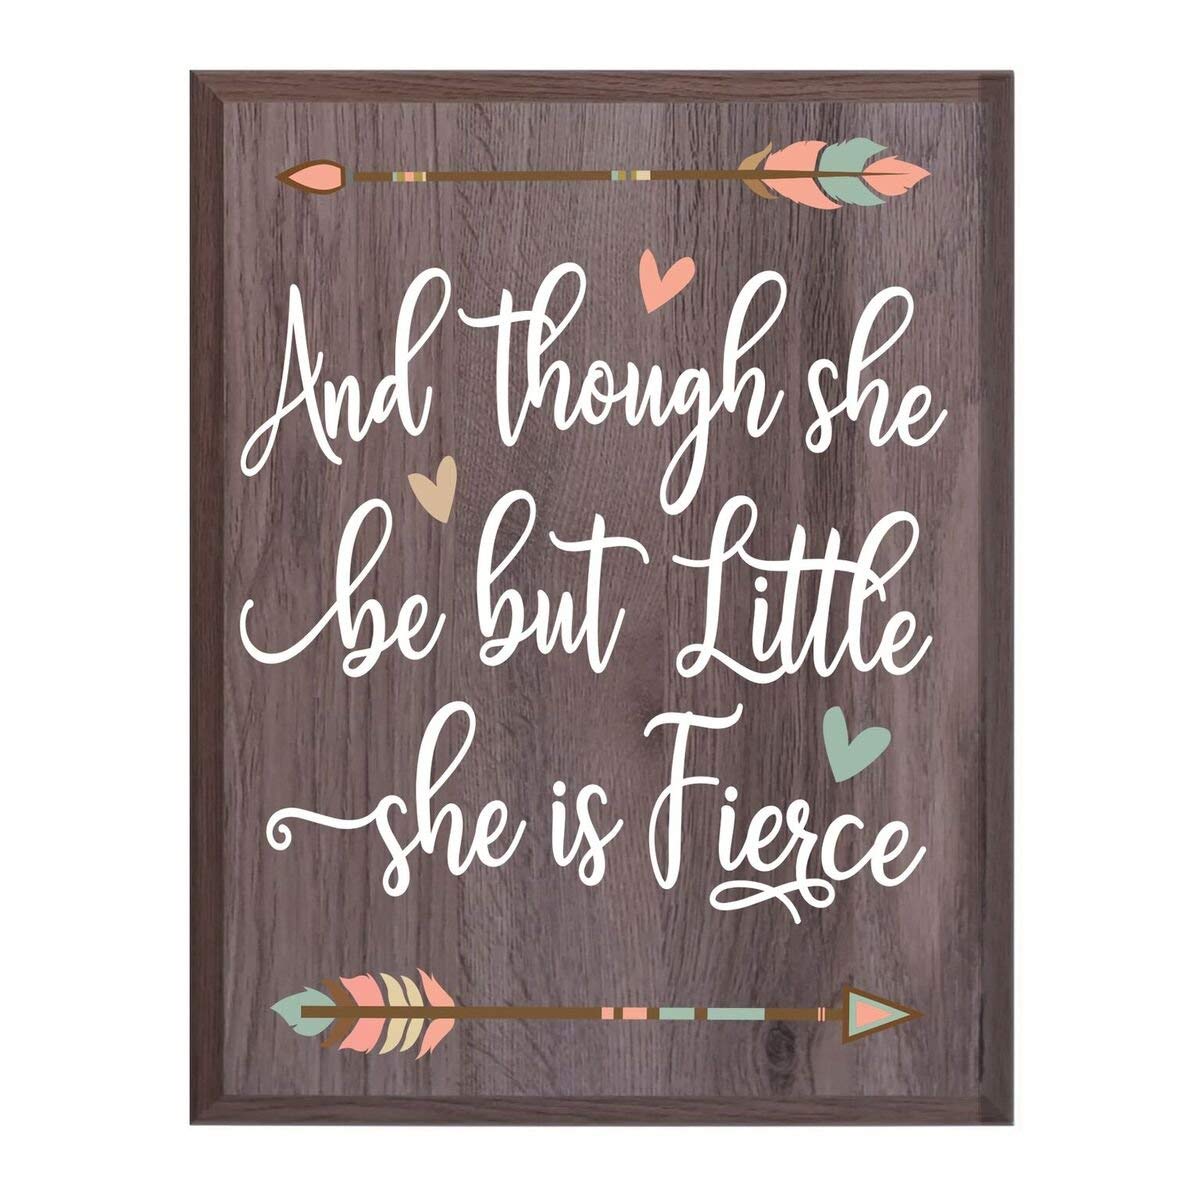 Housewarming Family Wall Hanging Plaque Gift - She Is Fierce - LifeSong Milestones